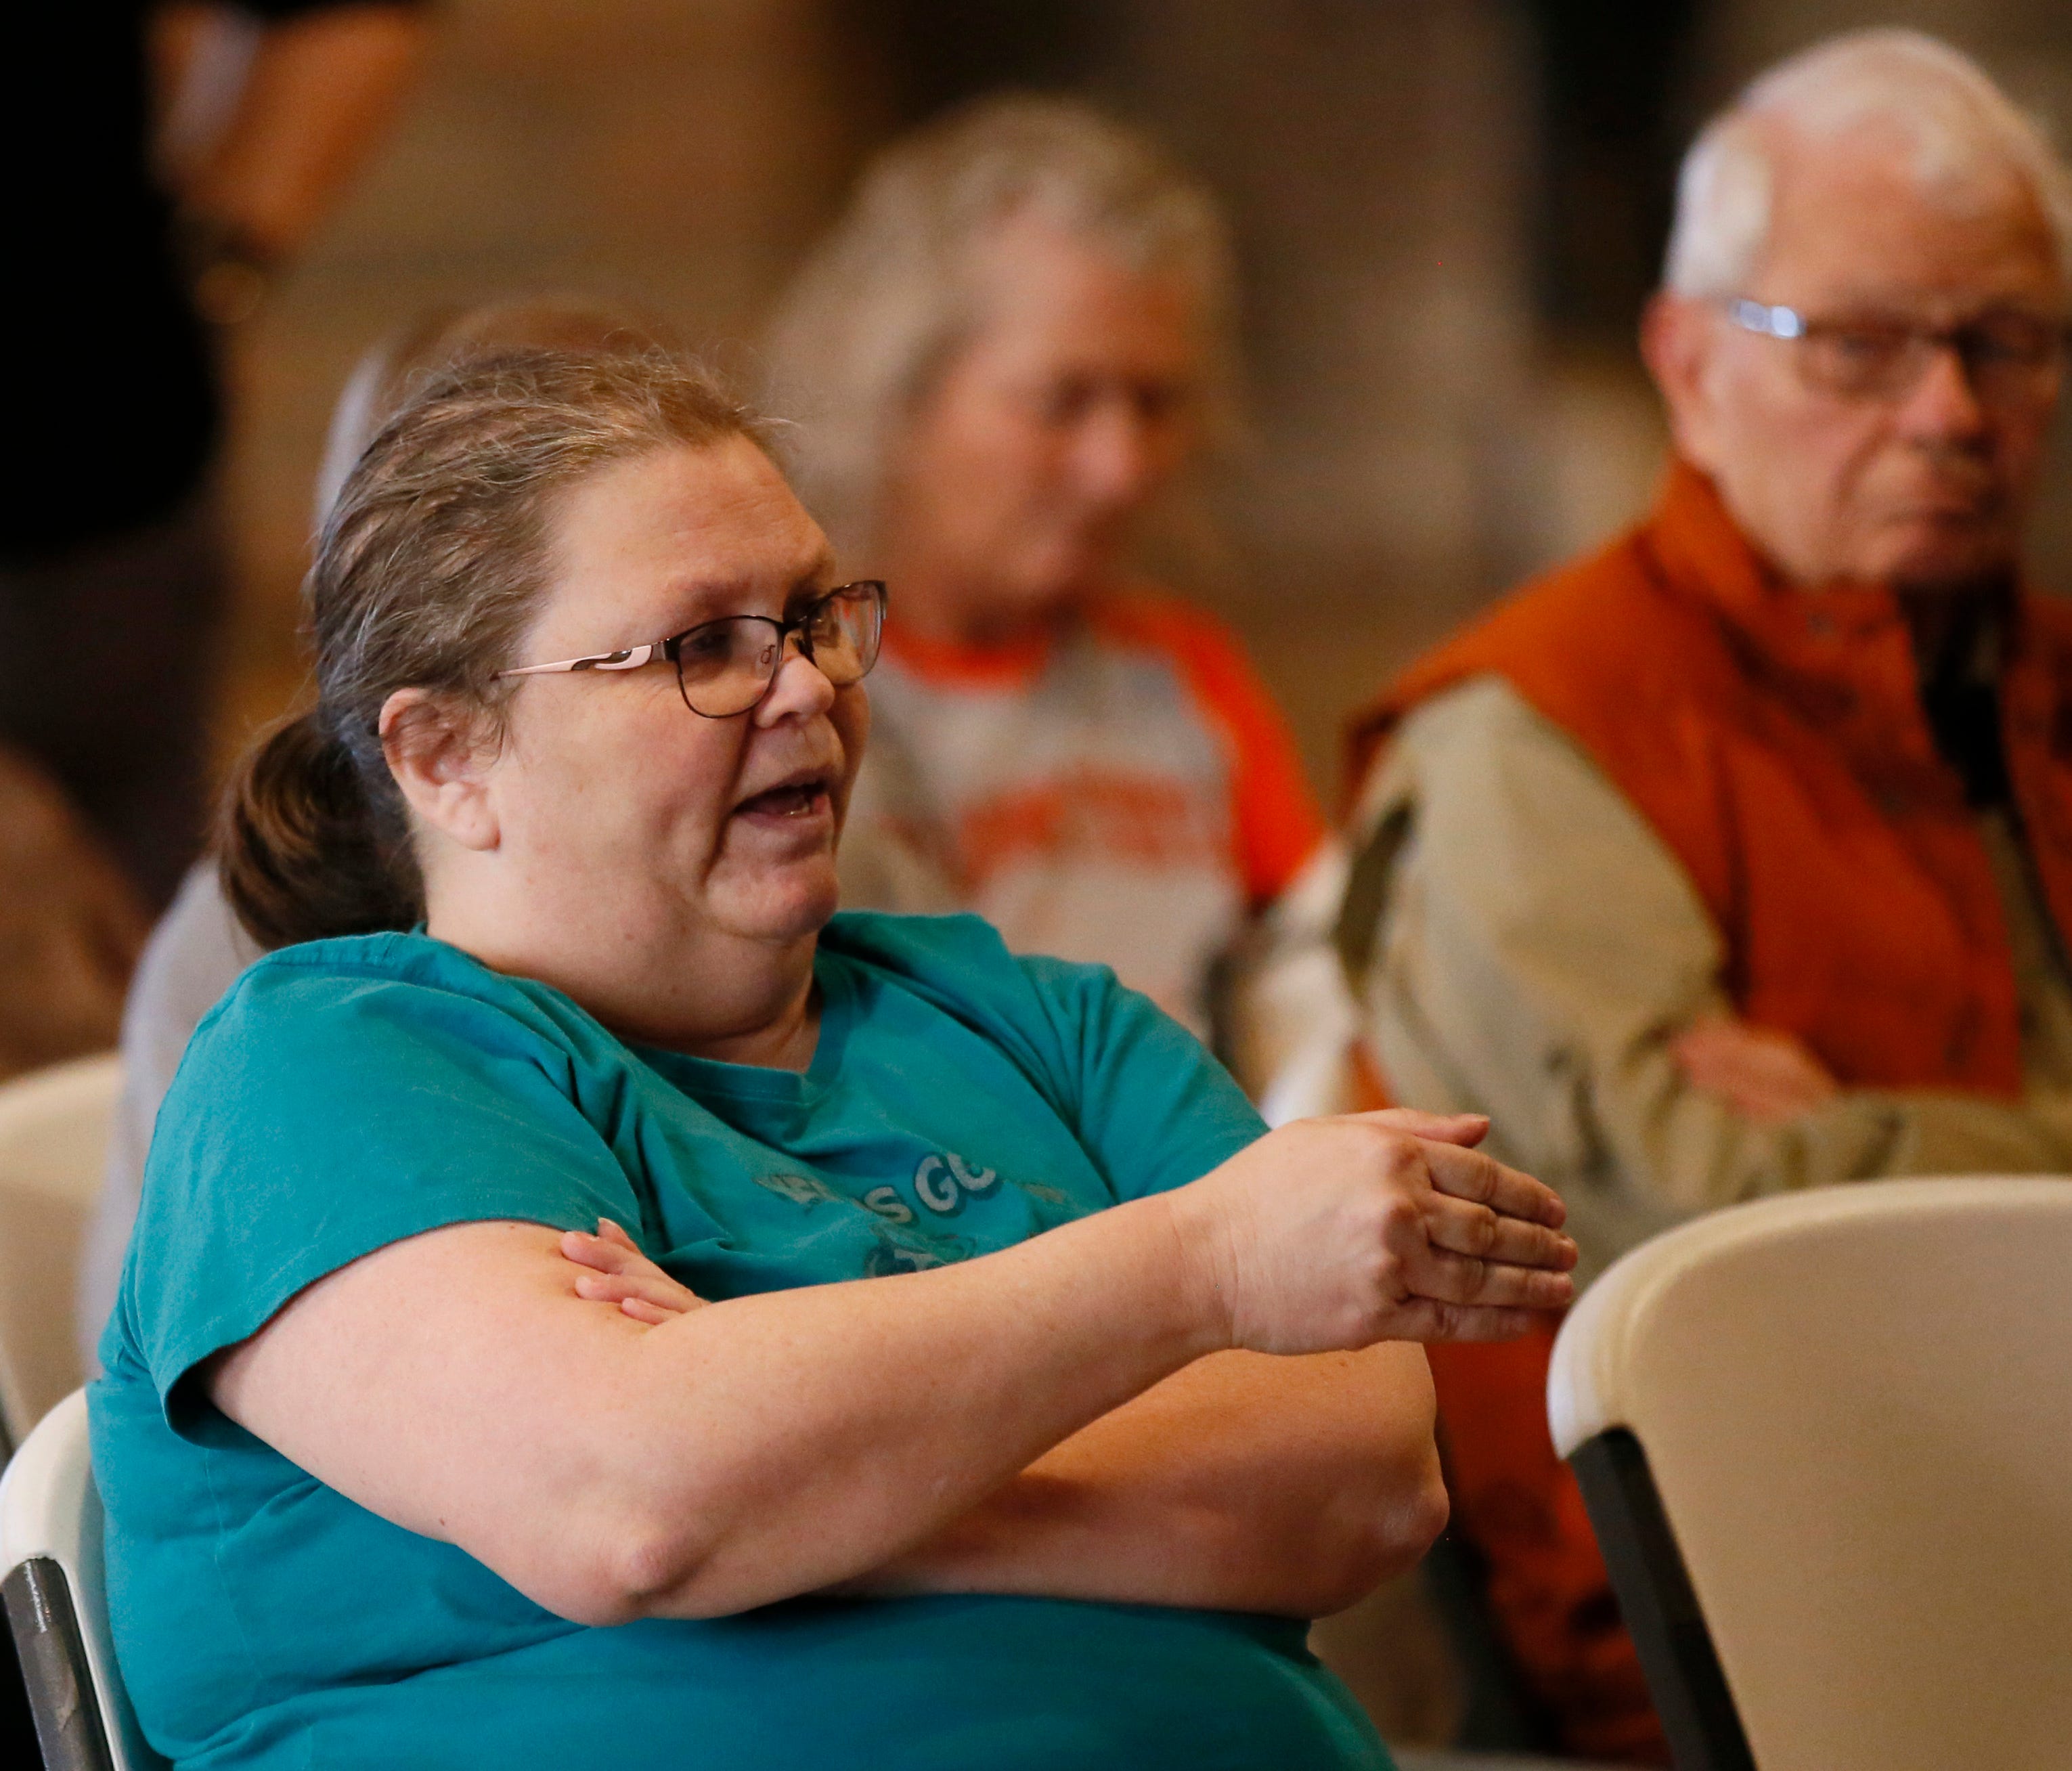 Pattye McAbee, of Carney, Okla., asks a question of U.S. Rep. Frank Lucas, R-Oklahoma, during a town hall meeting in Chandler, Okla., Wednesday, Feb. 22, 2017. McAbee said that she had voted for Hillary Clinton and wanted Congress to leave Obamacare 